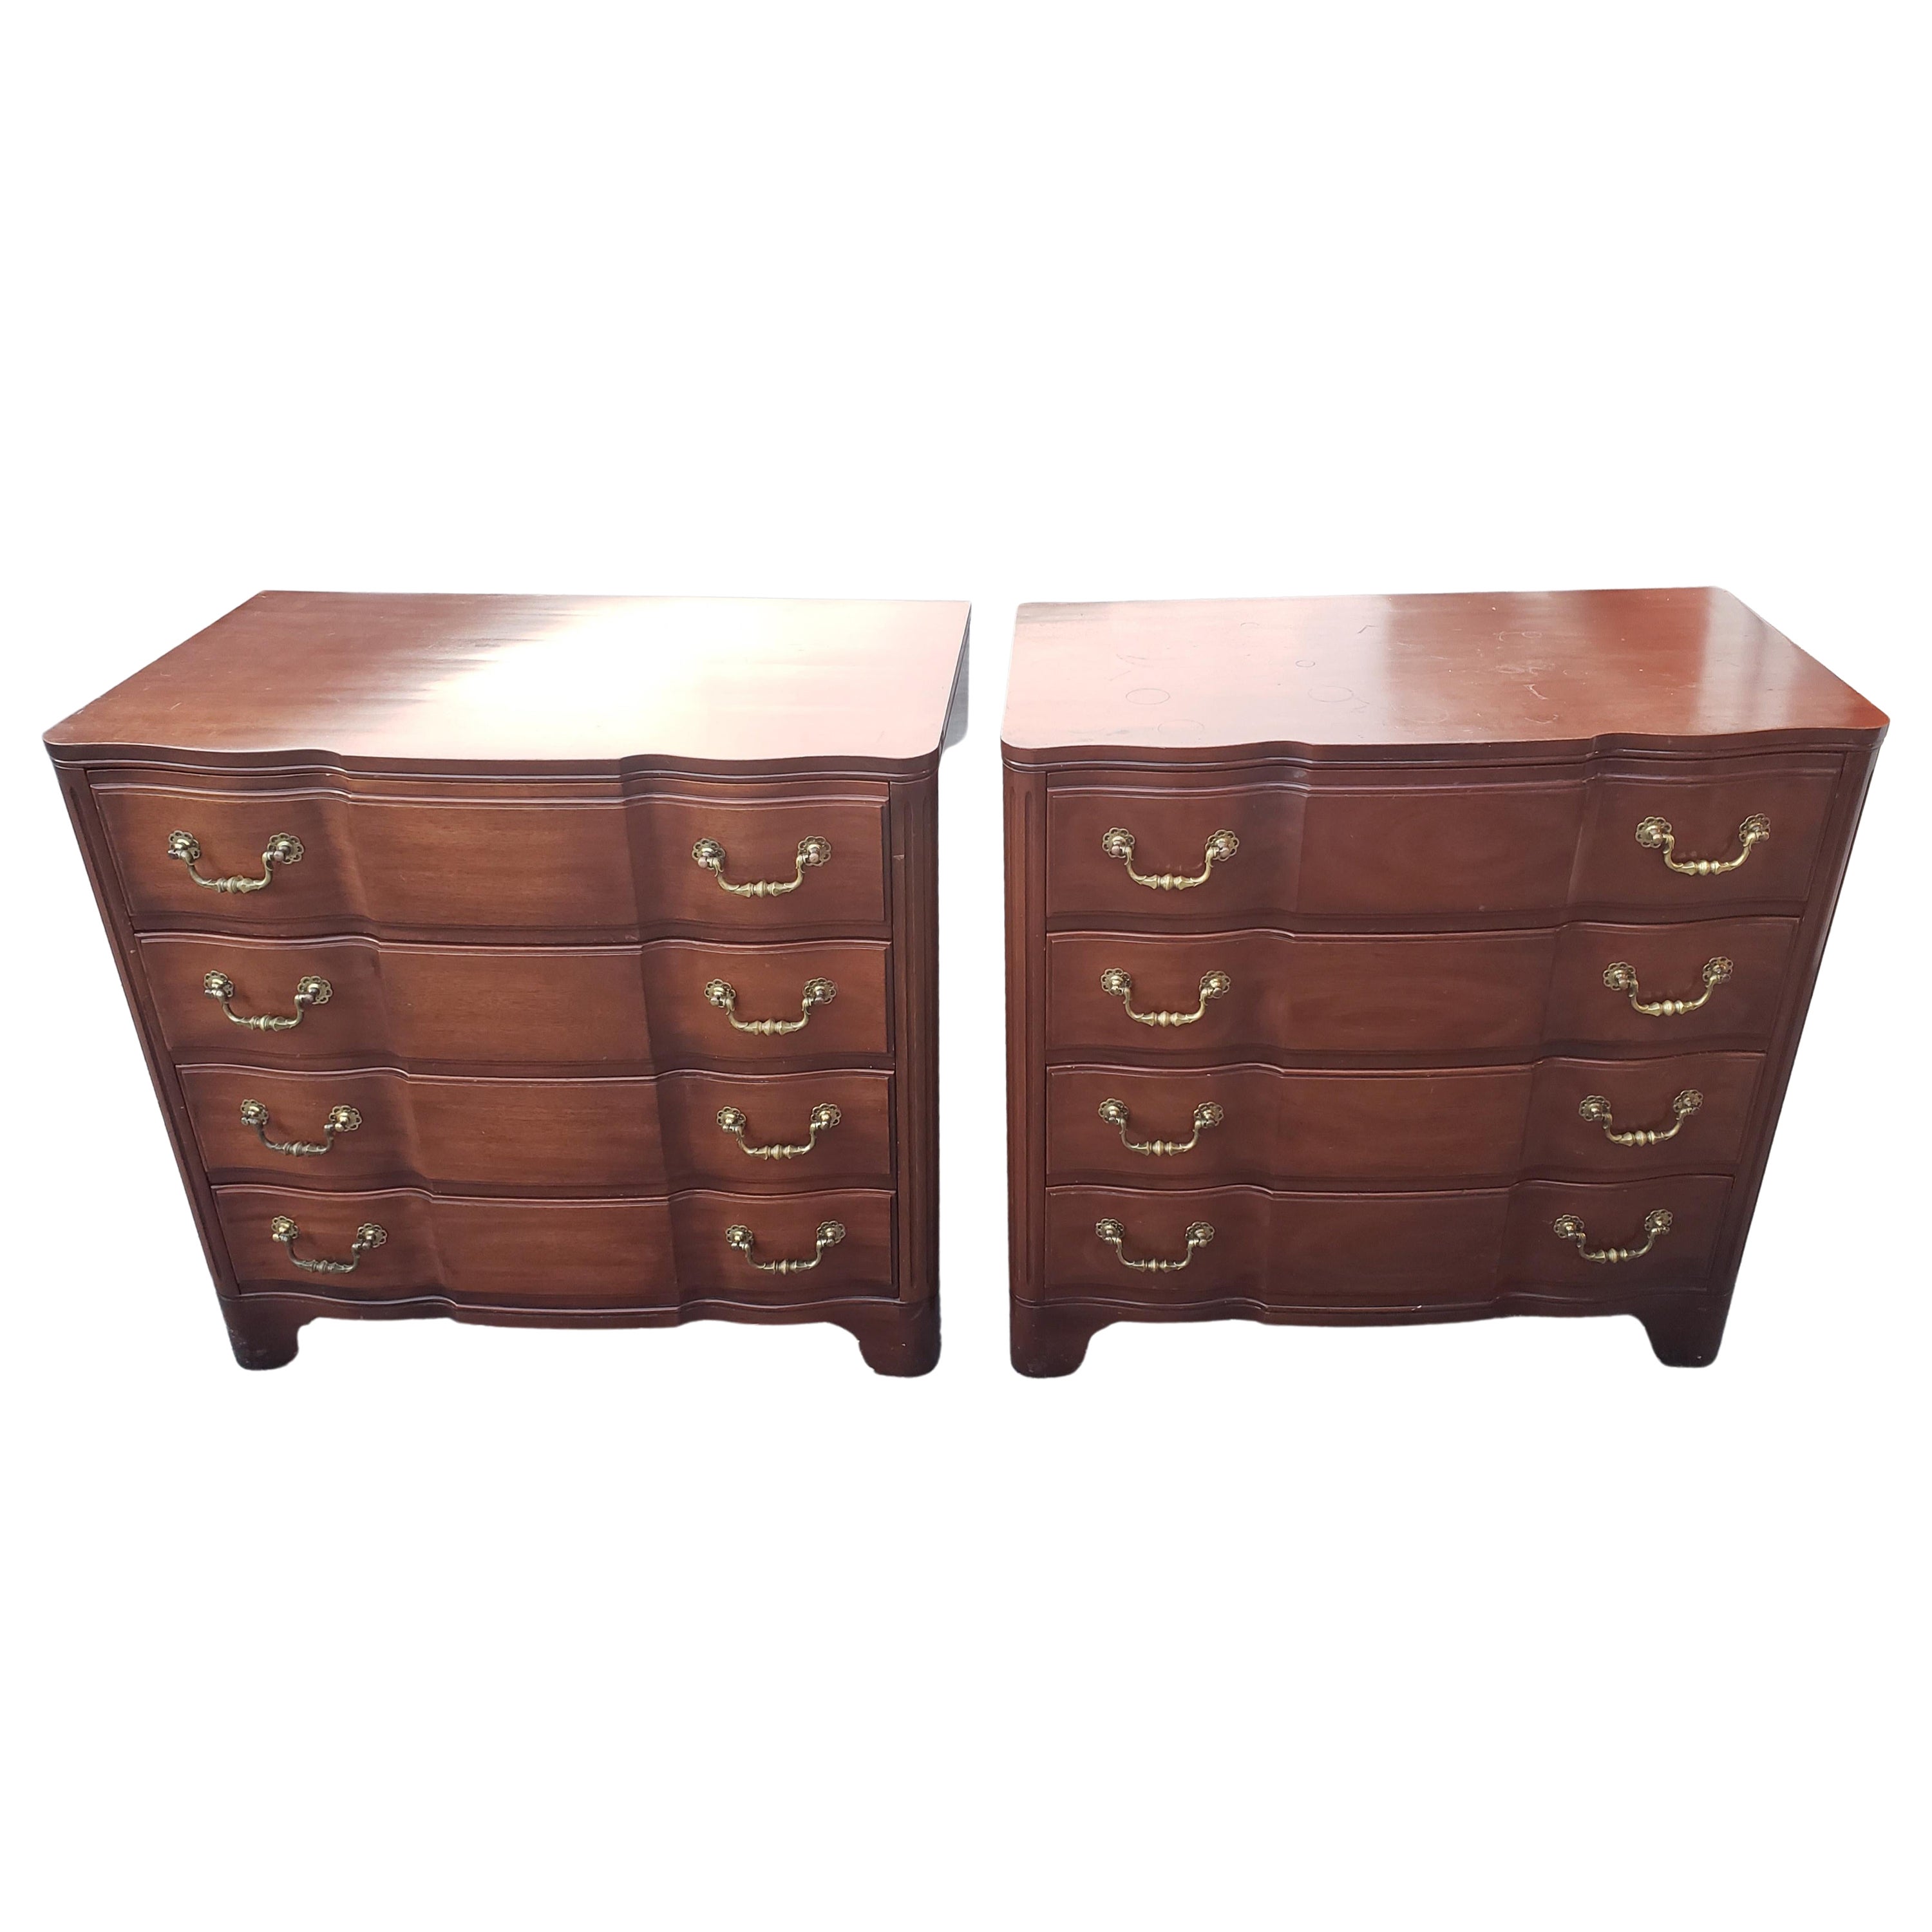 A pair of John Widdicomb Oxford Finish Mahogany Block Front 4 Drawer Bachelor chests. In Very Good Vintage Furniture Condition, High Quality Craftsmanship, Solid Condition, Normal Age Wear, such as scuffs from normal daily use. Pictures show minor